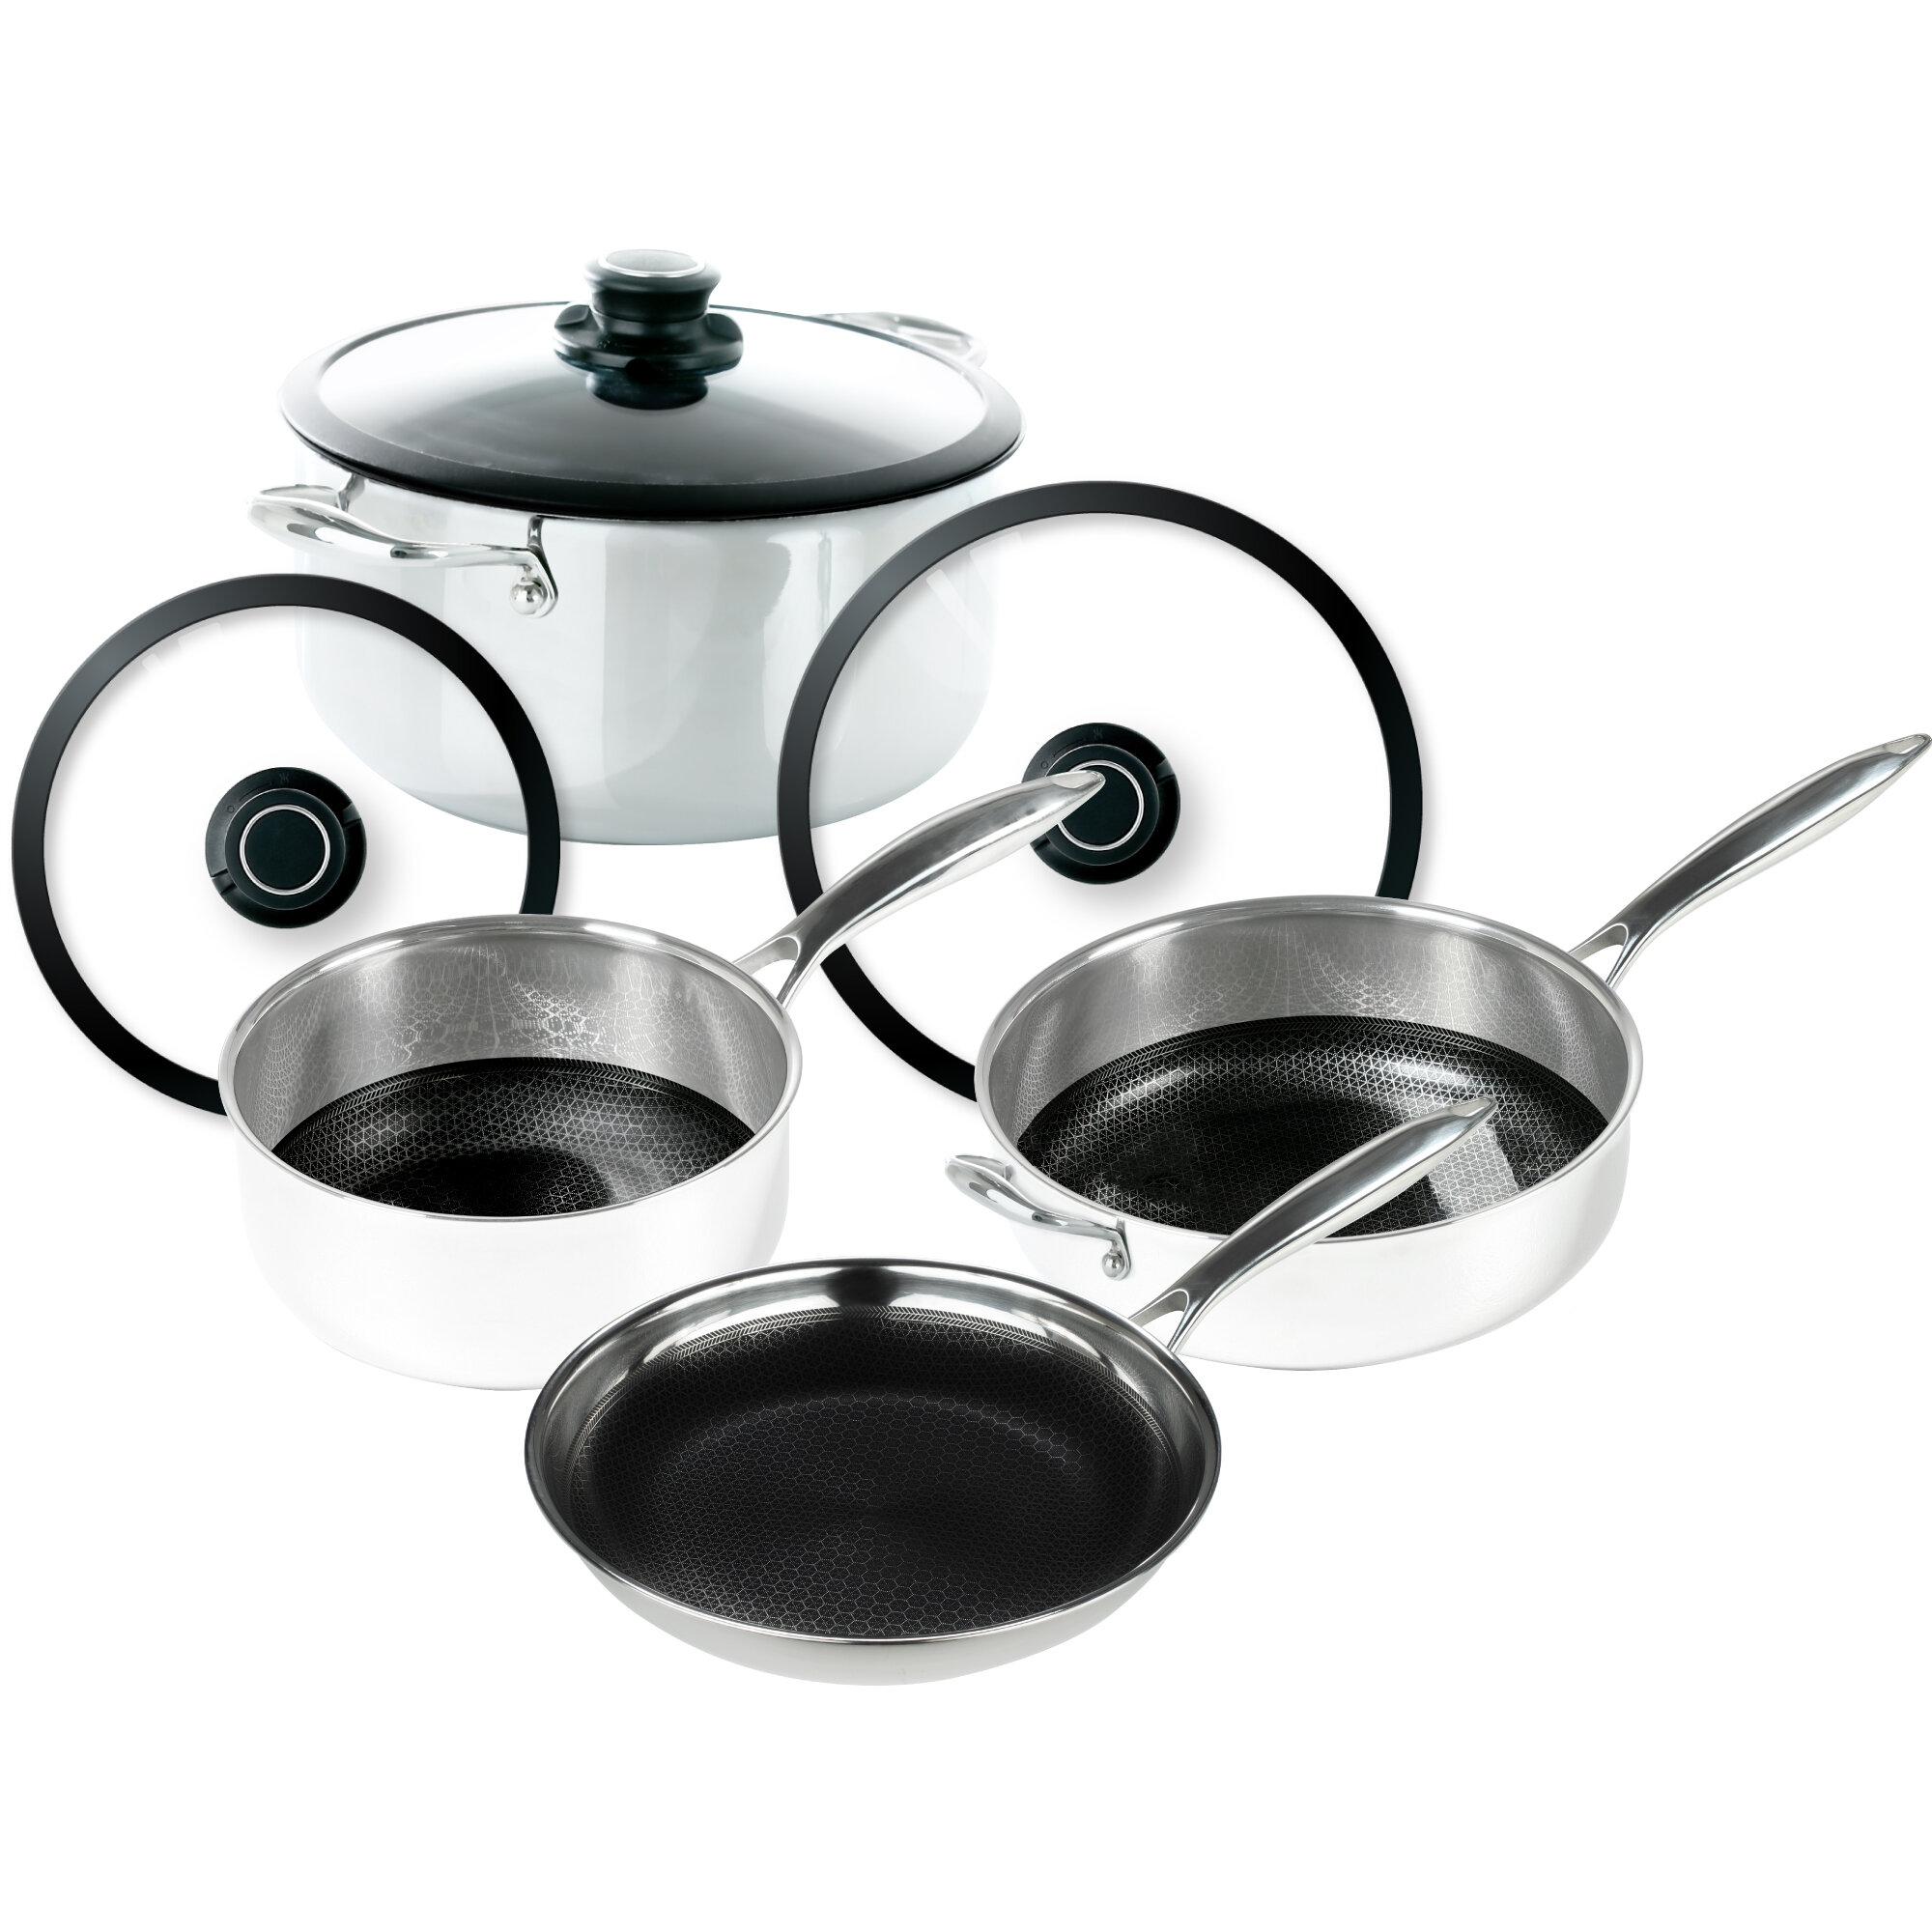 Wolfgang Puck 3-piece Stainless Steel Skillet Set, Scratch